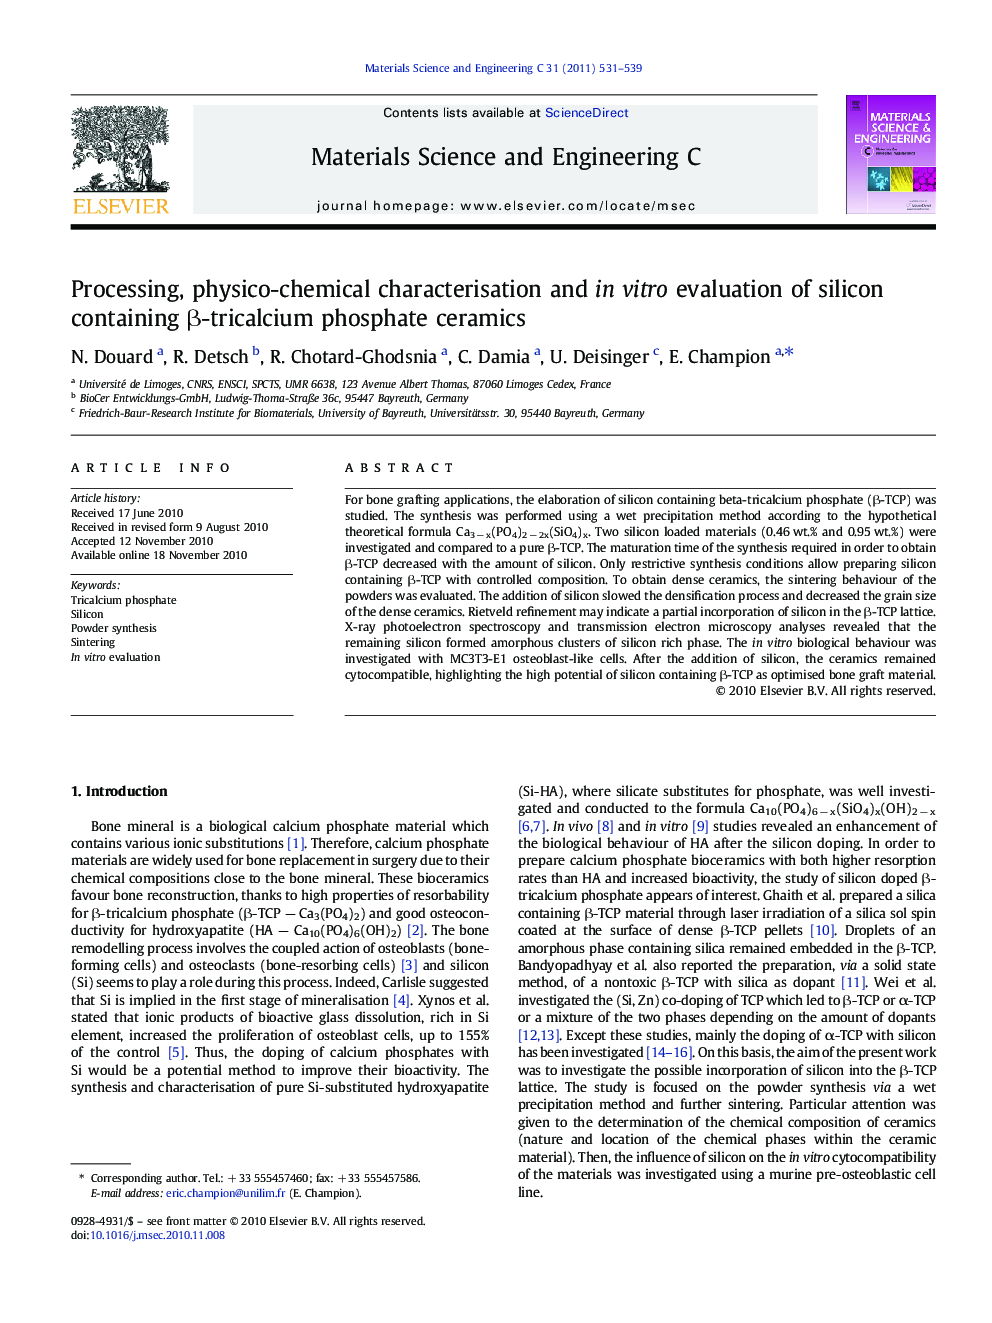 Processing, physico-chemical characterisation and in vitro evaluation of silicon containing Î²-tricalcium phosphate ceramics